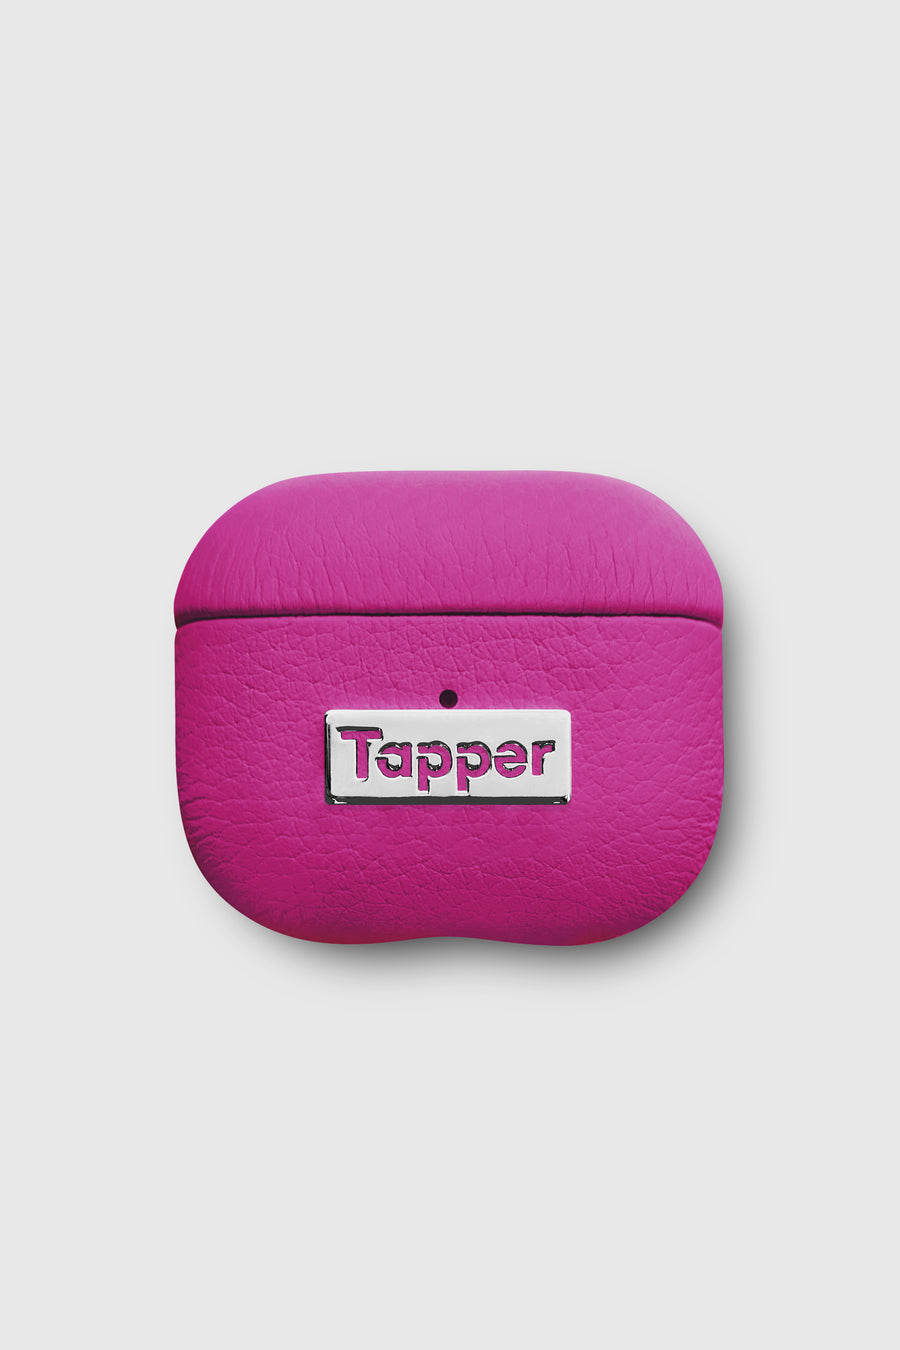 Tapper's luxurious hot pink genuine lamb leather AirPods case protects and elevates the look of your AirPods. The luxurious, protective case for AirPods with a metal logo plate colored in silver steps up your AirPods game. The next must-have high end protective Apple AirPods accessory in bright pink real leather with metal details. Compatible with AirPods (3rd generation). Designed in Sweden by Tapper. Free Express Shipping at gettapper.com